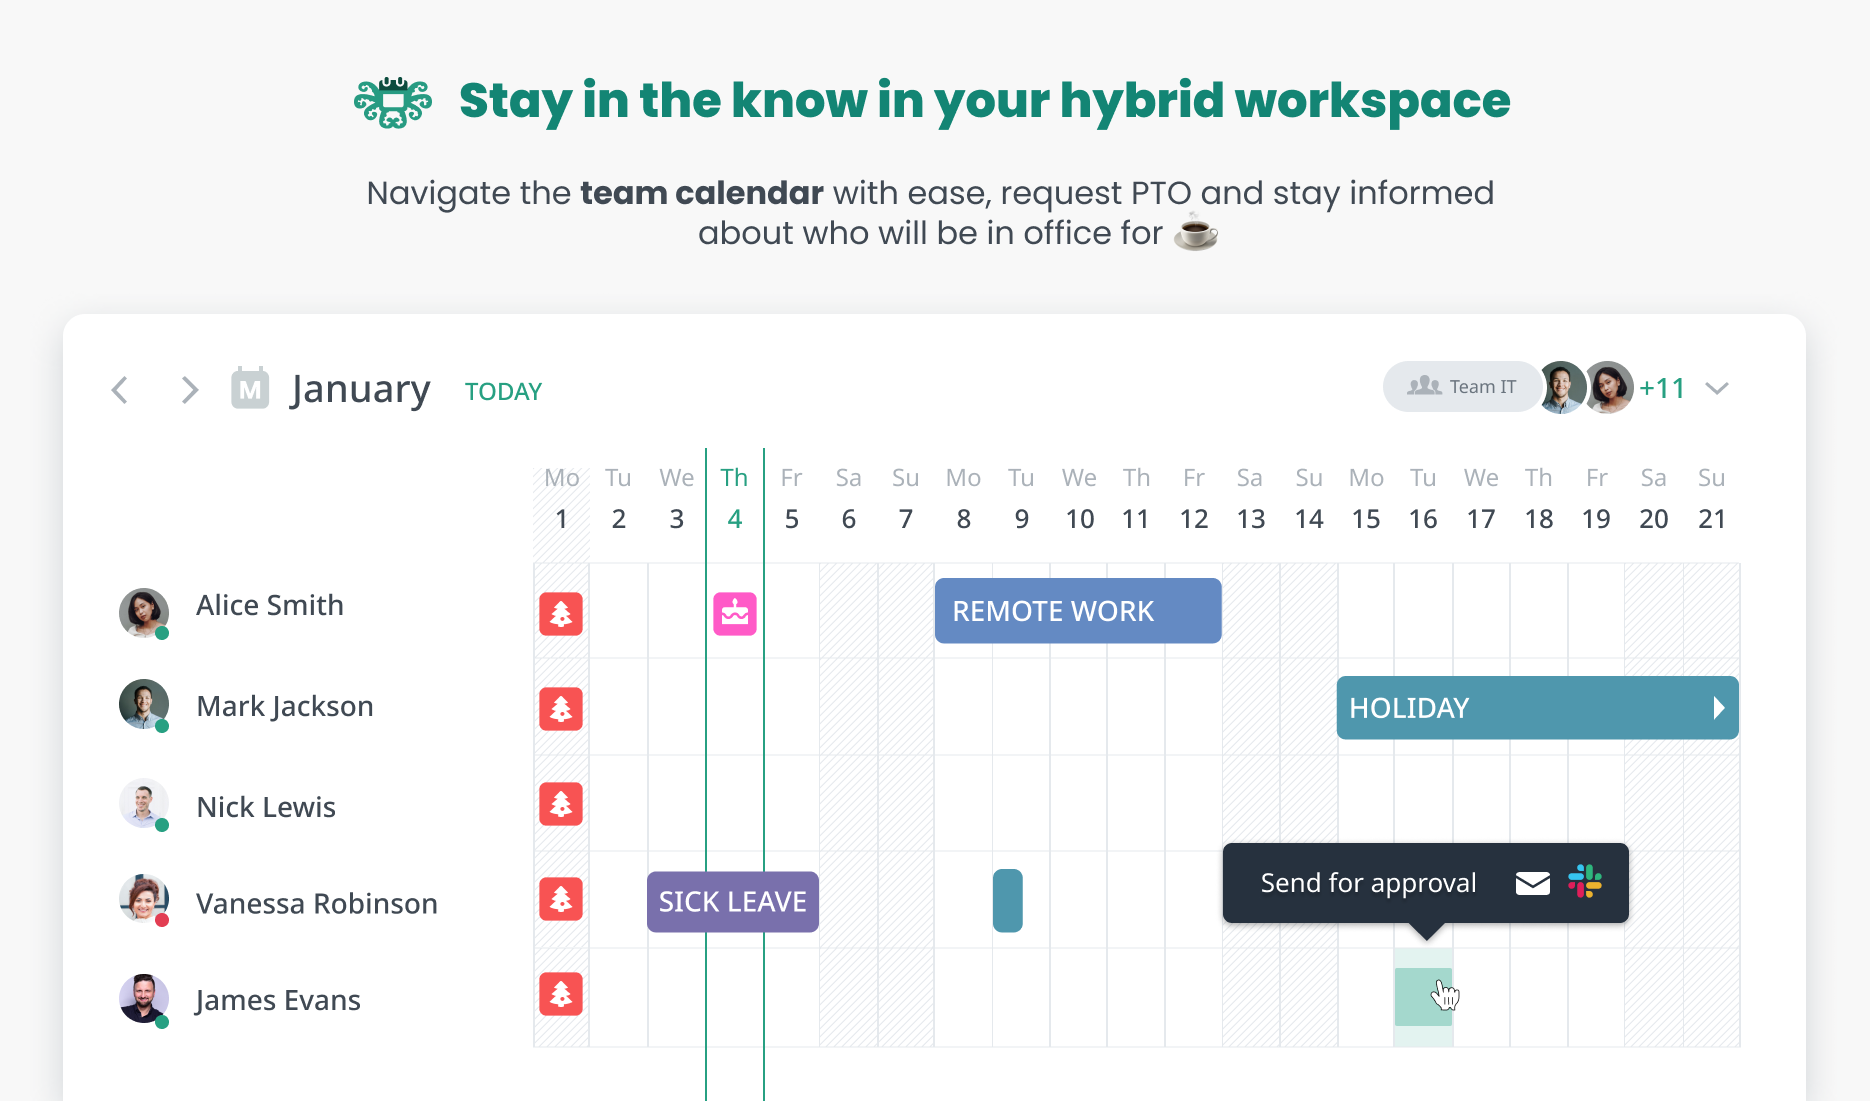 Calendar with detailed information about upcoming absences, holidays, and remote work